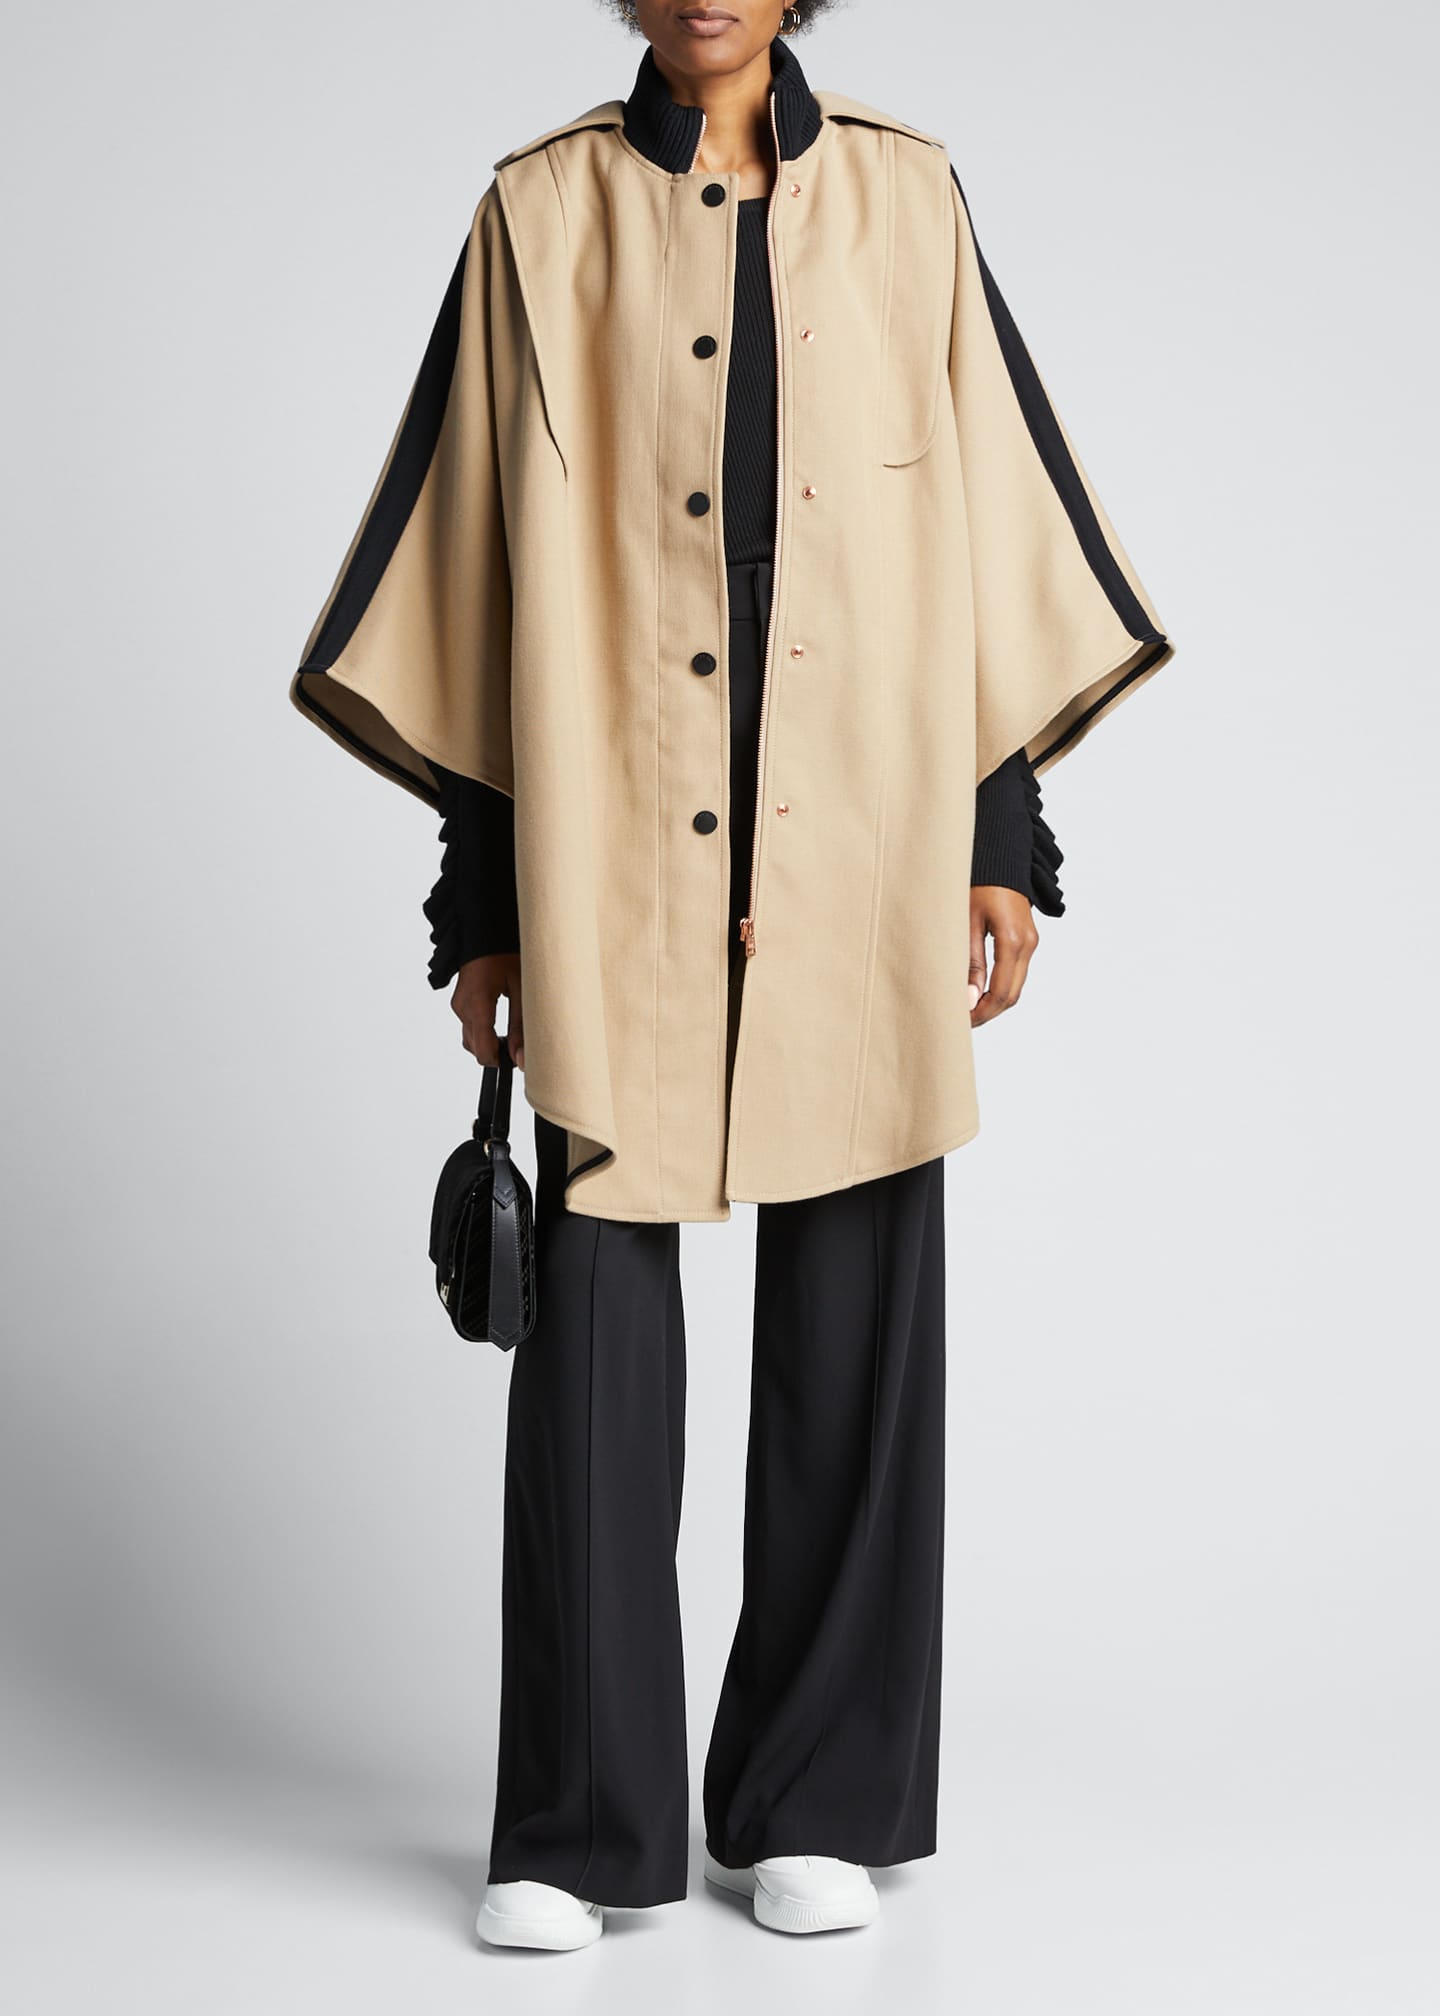 Co Flocked One-Button Coat, Ivory